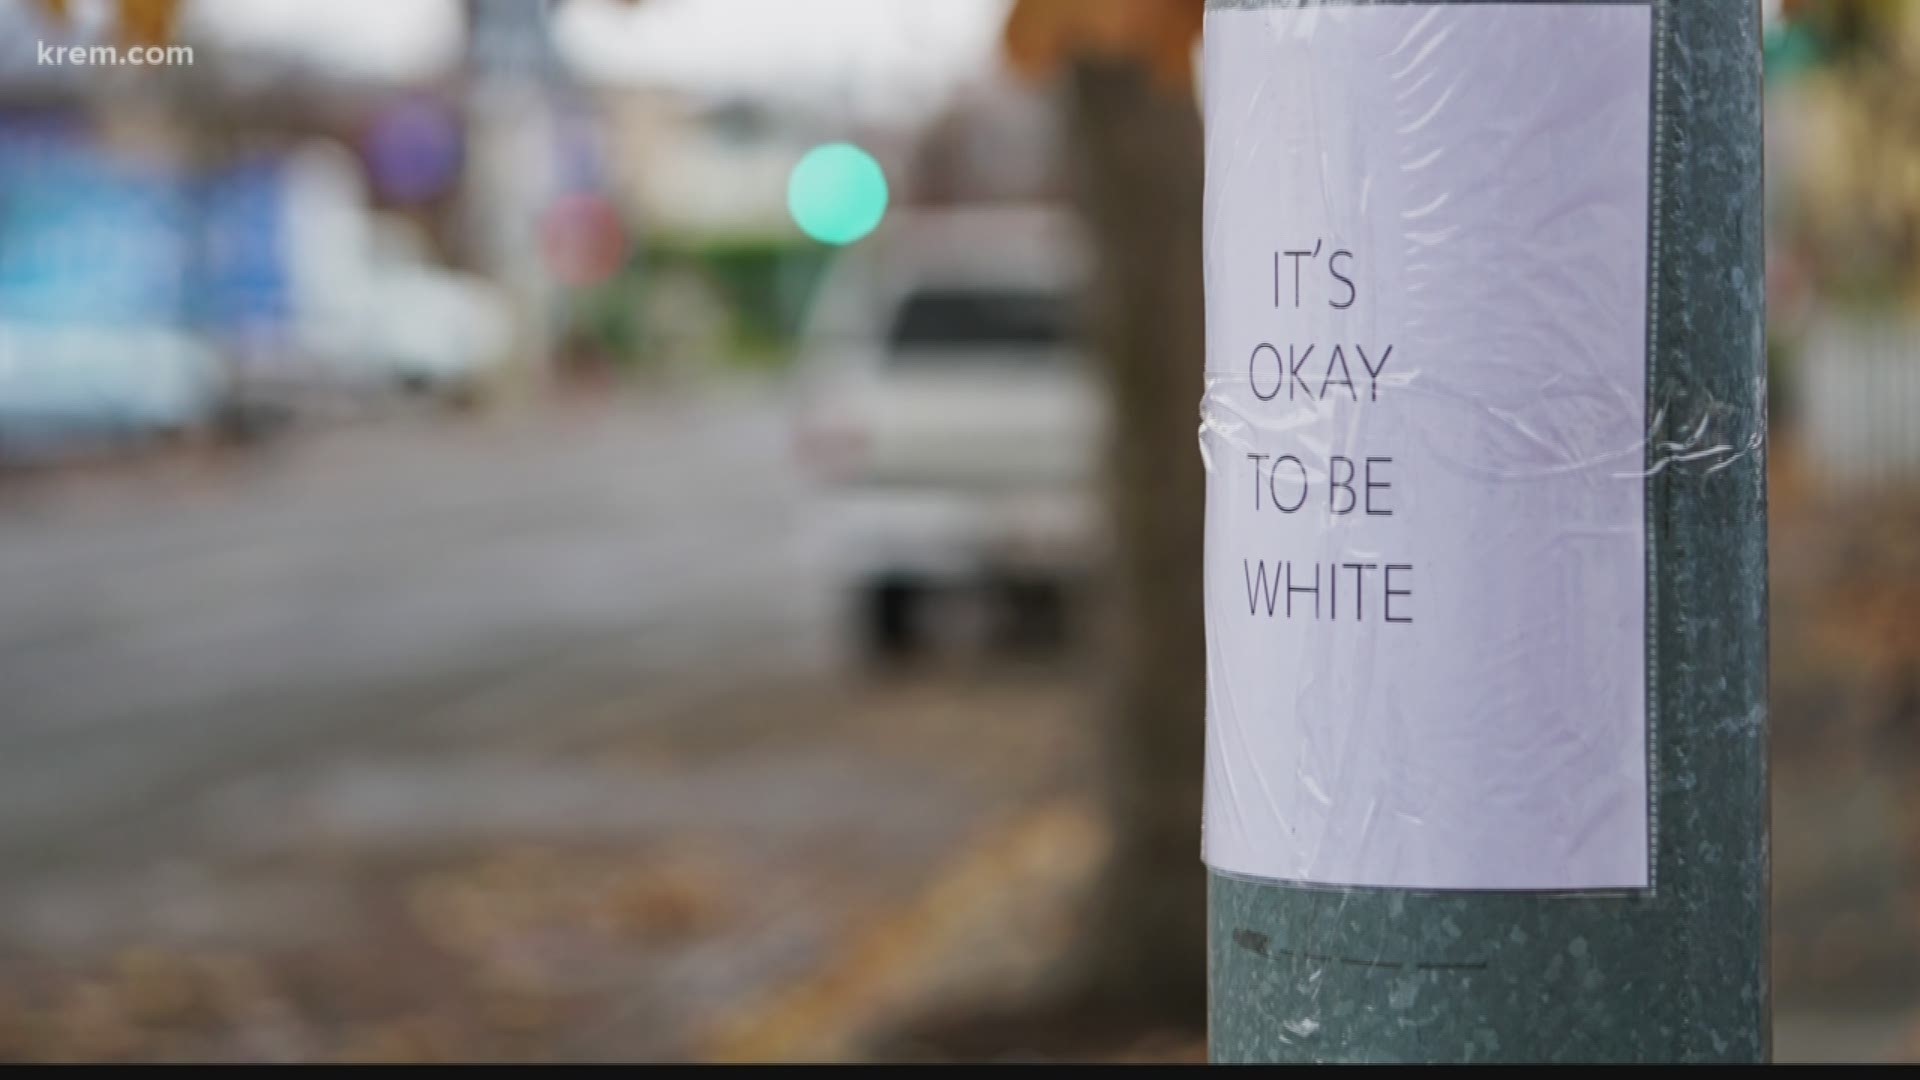 More than 30 fliers with the message "It's okay to be white," were found on the University of Idaho's campus on Thursday. The U of I president said the slogan is "associated with a provocation by white supremacists and neo-Nazi groups."